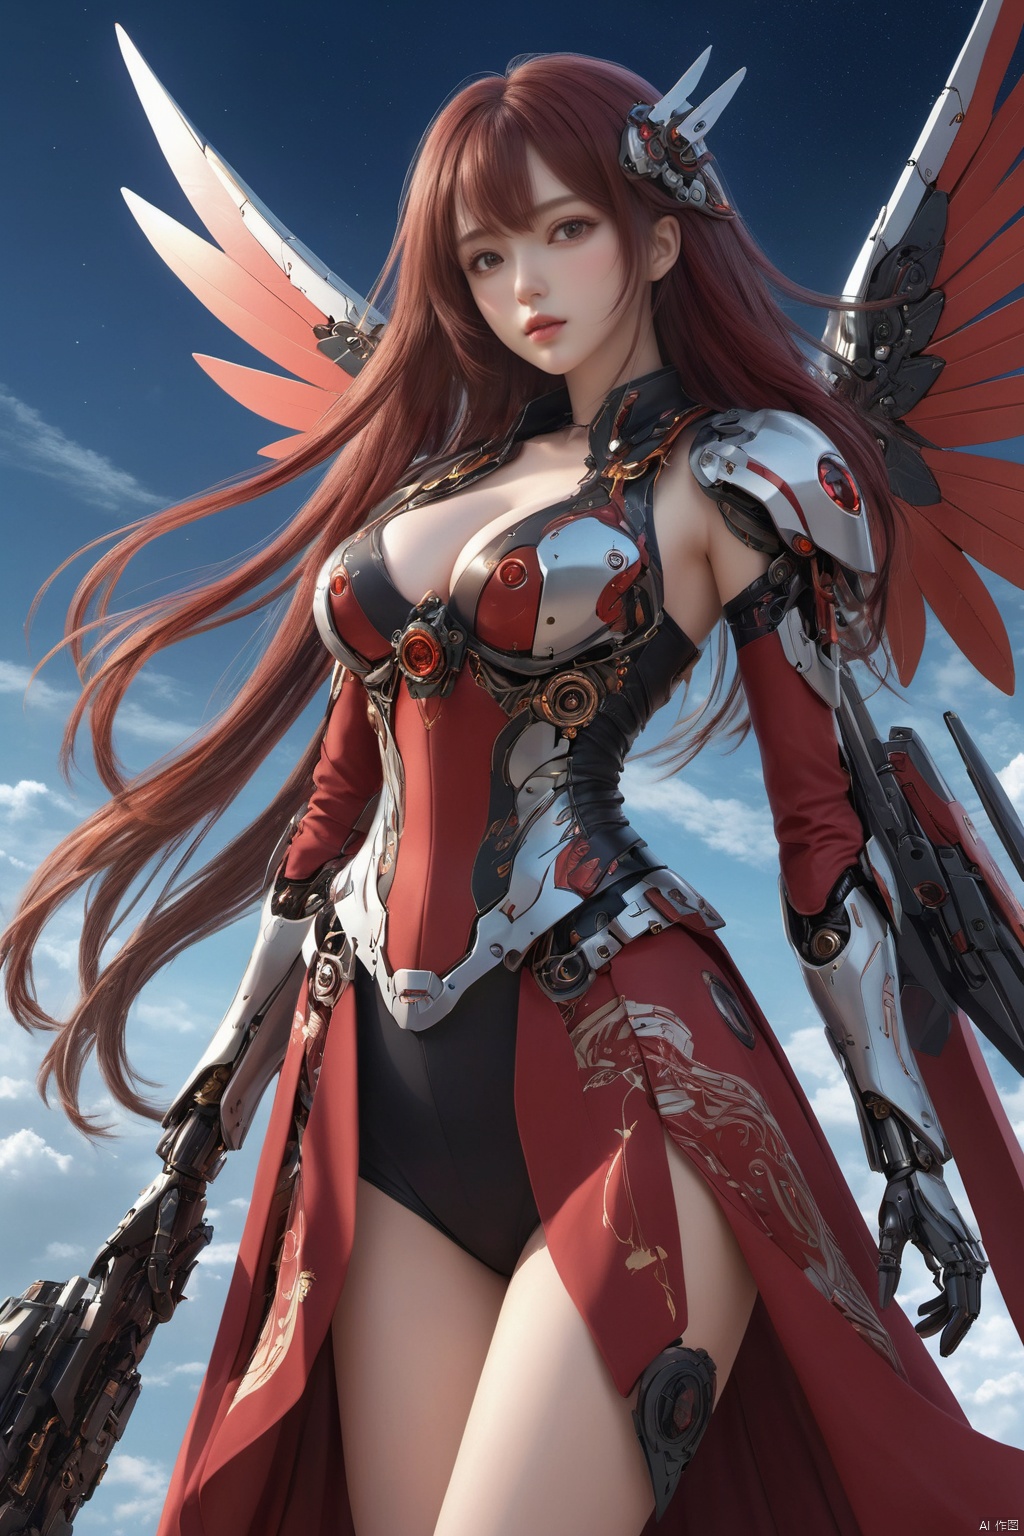  ((masterpiece)), ((best quality)), ((illustration)), extremely detailed,1 girl,mecha clothes,, big breasts,Dark red very_long_hair, scifi hair ornaments, beautiful detailed deep eyes, beautiful detailed sky, cinematic lighting, wind,Mechanical wings